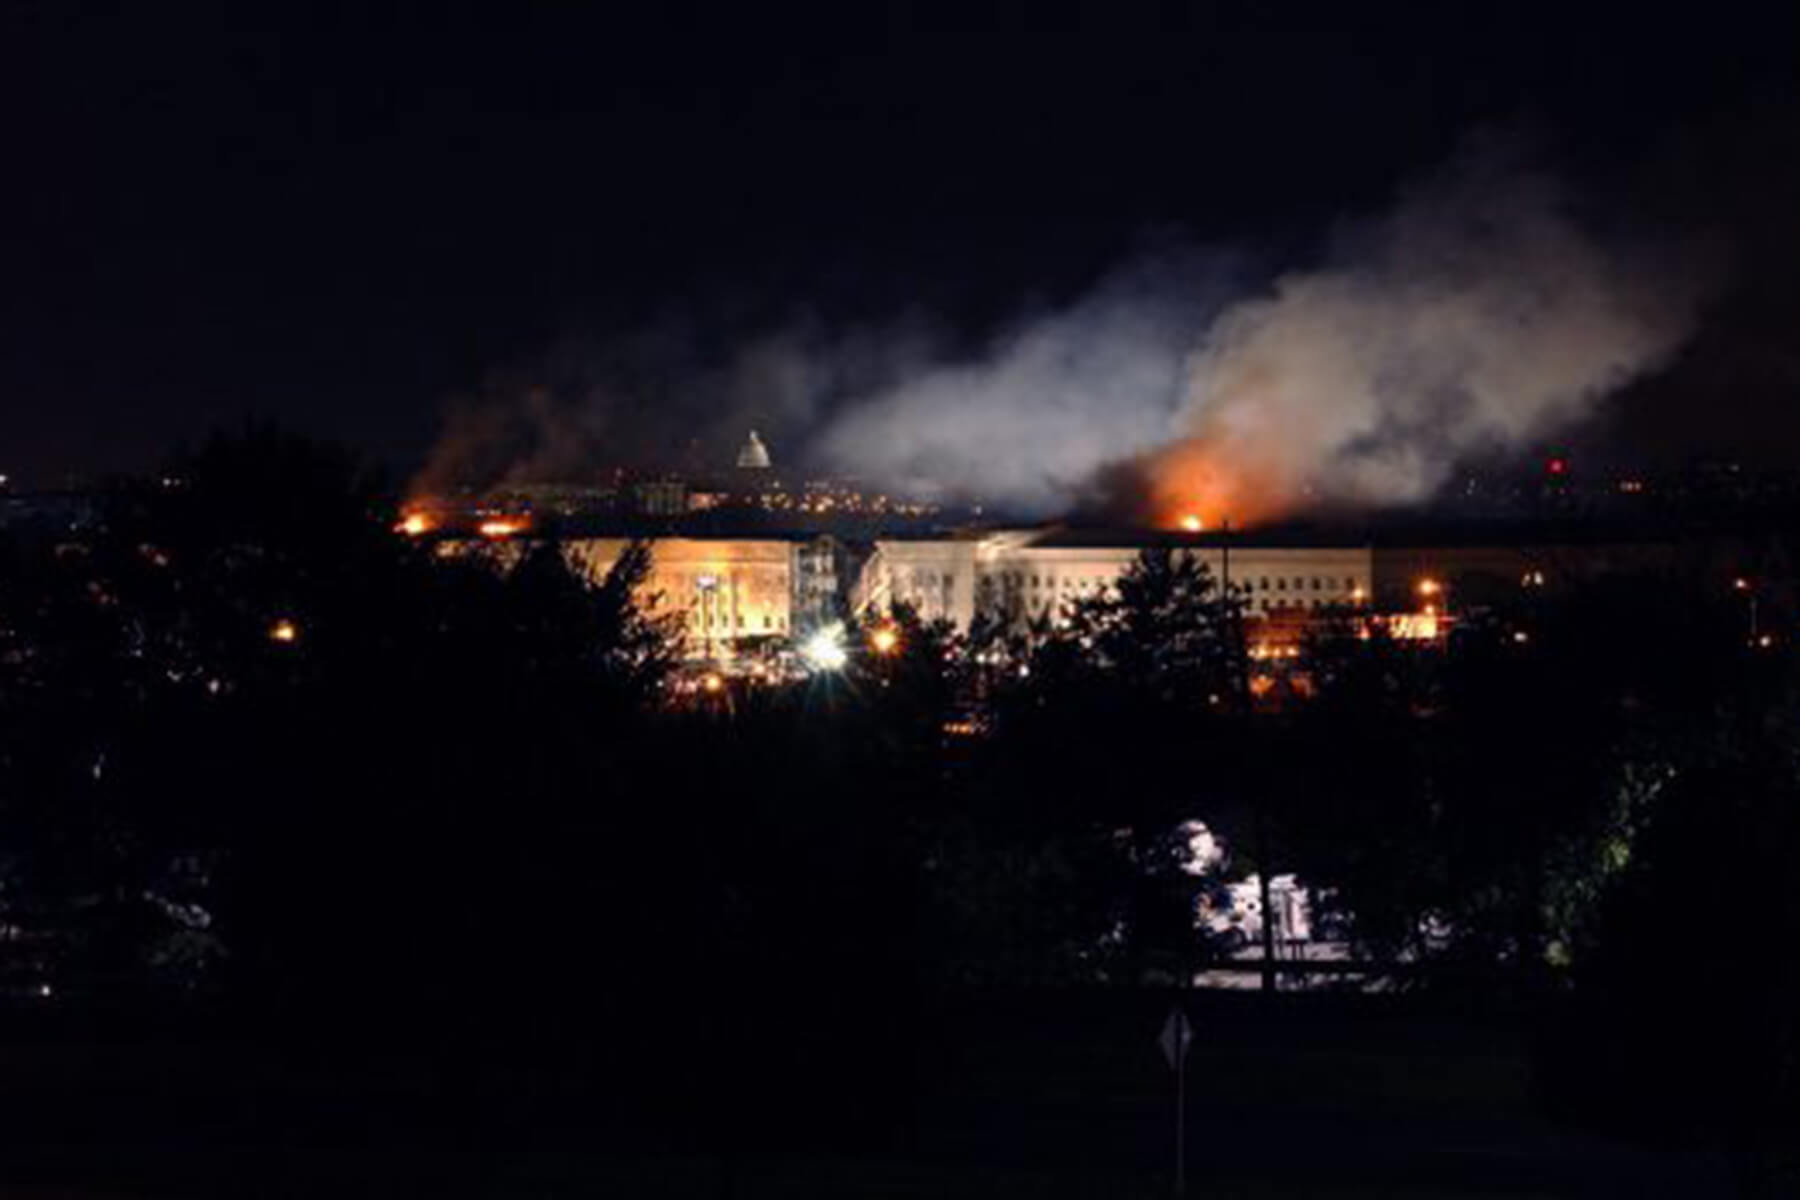  Smoke and flame appear in the Washington skyline in the aftermath of the terrorist attack on the Pentagon, Sept. 11, 2001.Navy Petty Officer 2nd Class Robert Houlihan